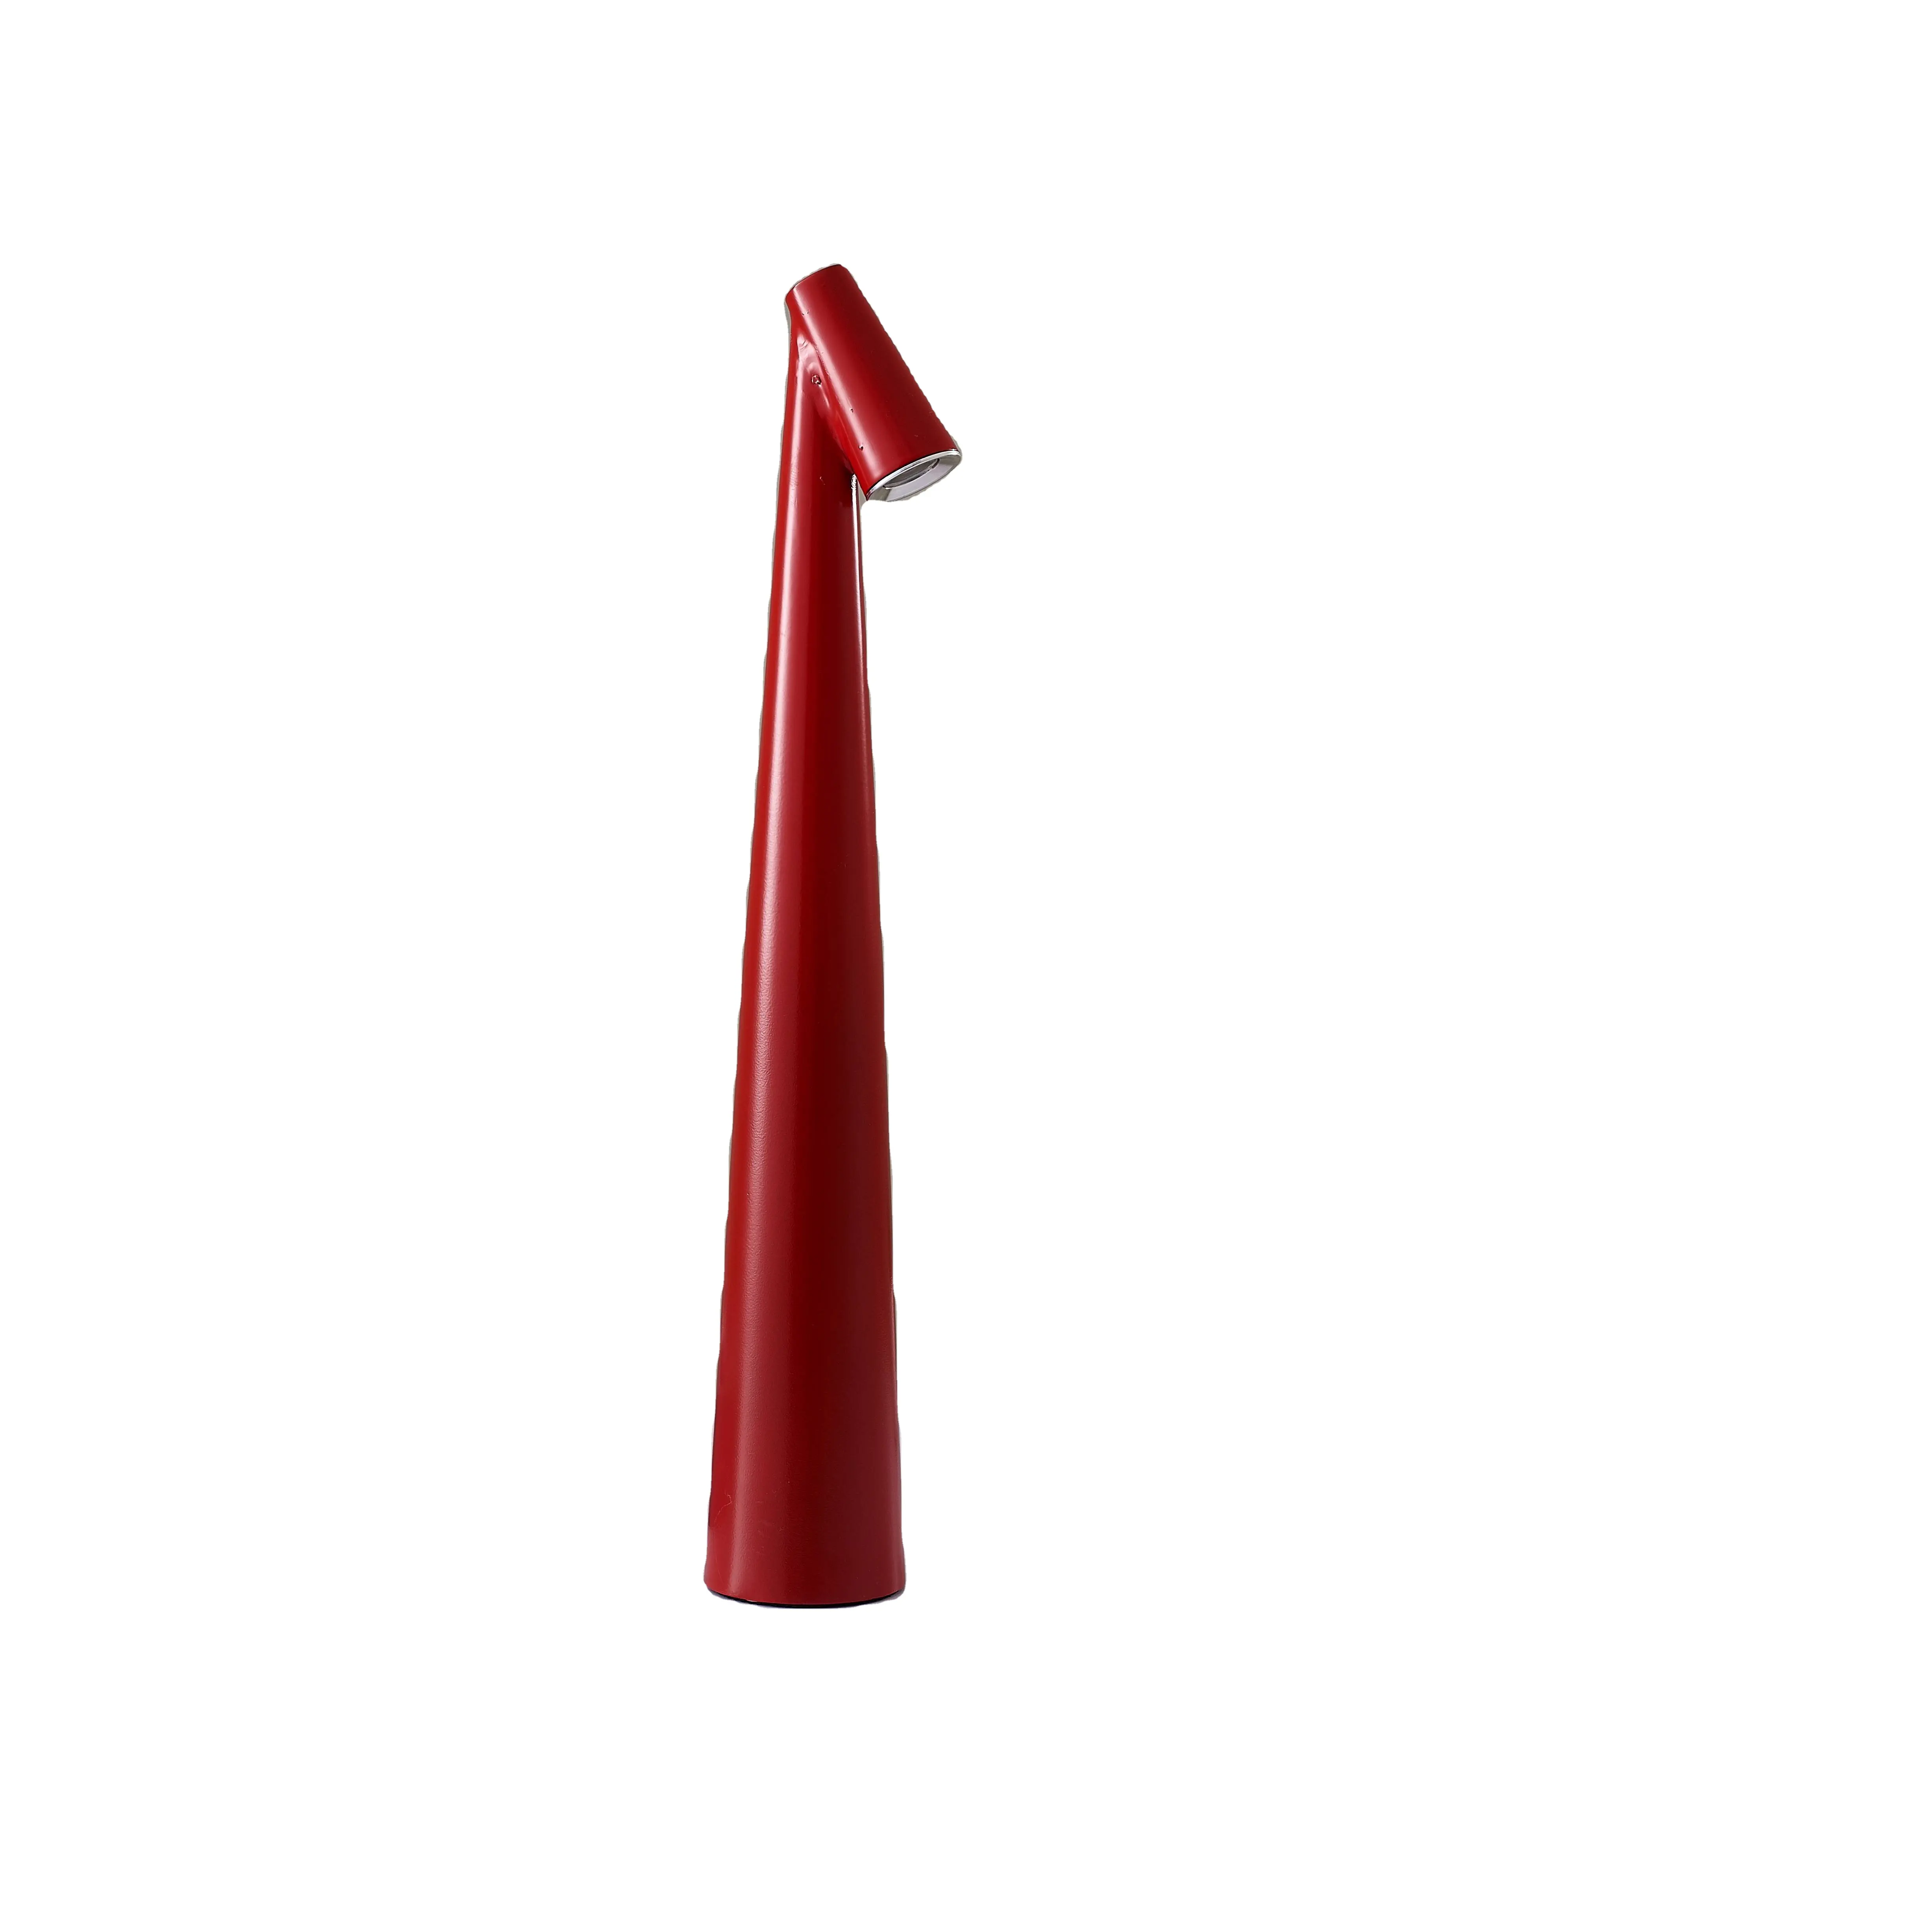 Nordic Minimalist Style Red-Color LED Desk Lamp Small Size Iron Body with Built-In Battery Energy-Saving Mobile Lighting